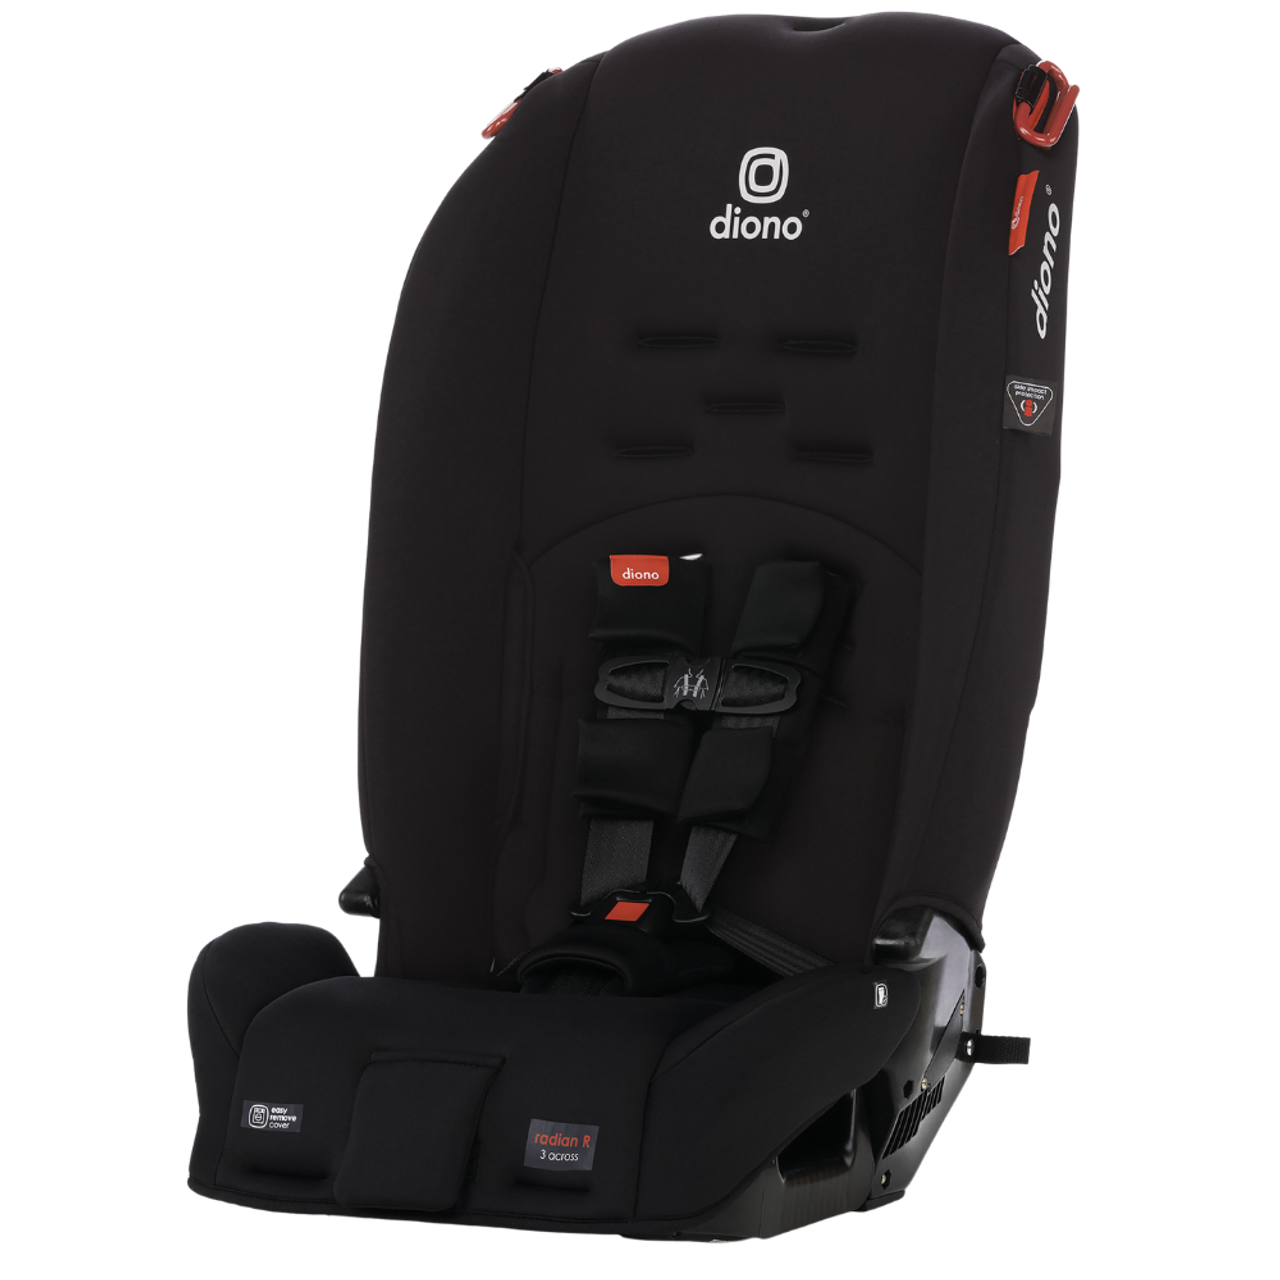 https://www.momjunction.com/wp-content/uploads/product-images/diono-radian-convertible-car-seat_afl553.png